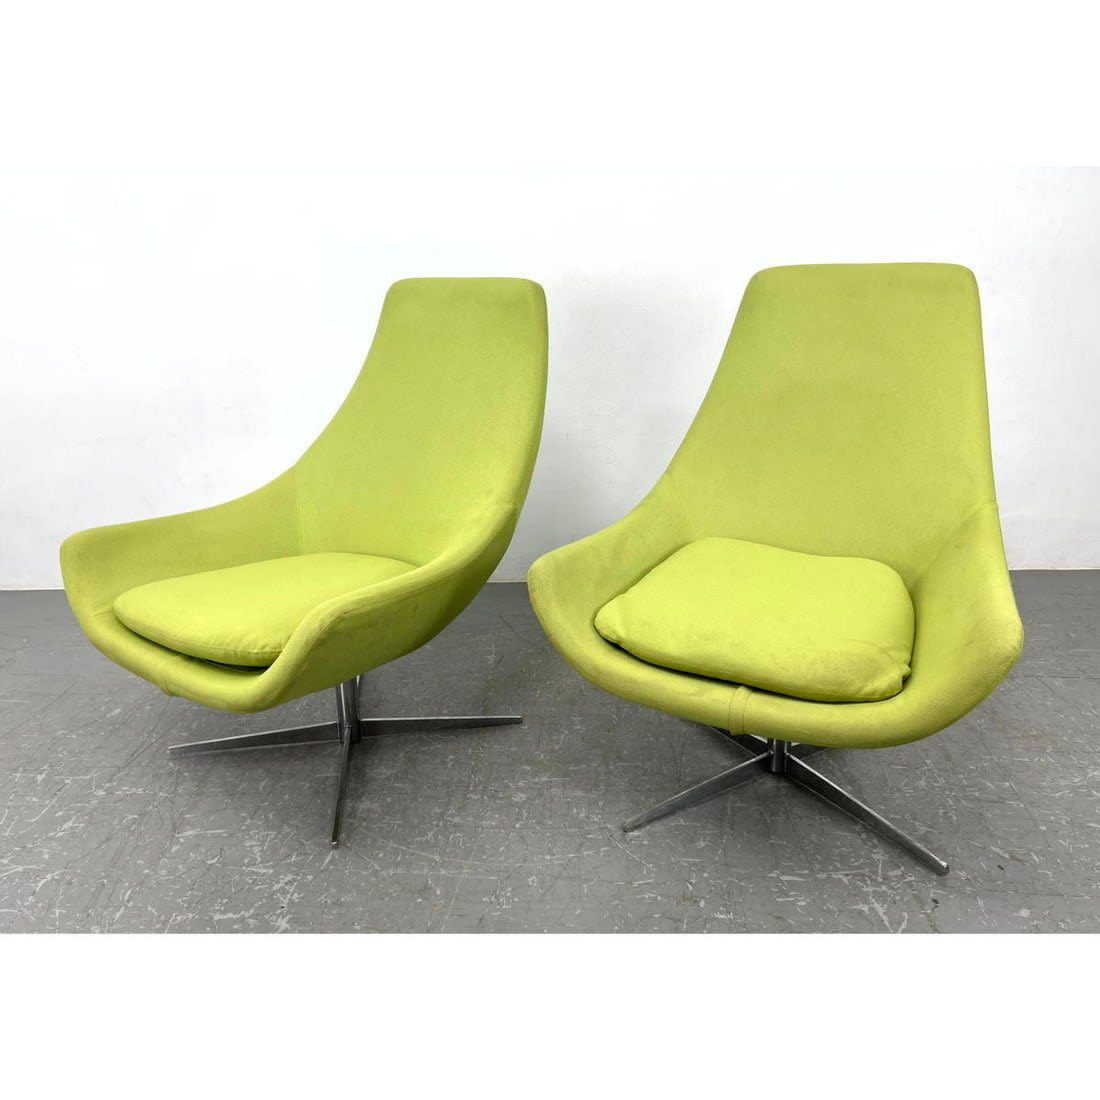 Pair Lime Green Lounge Chairs.